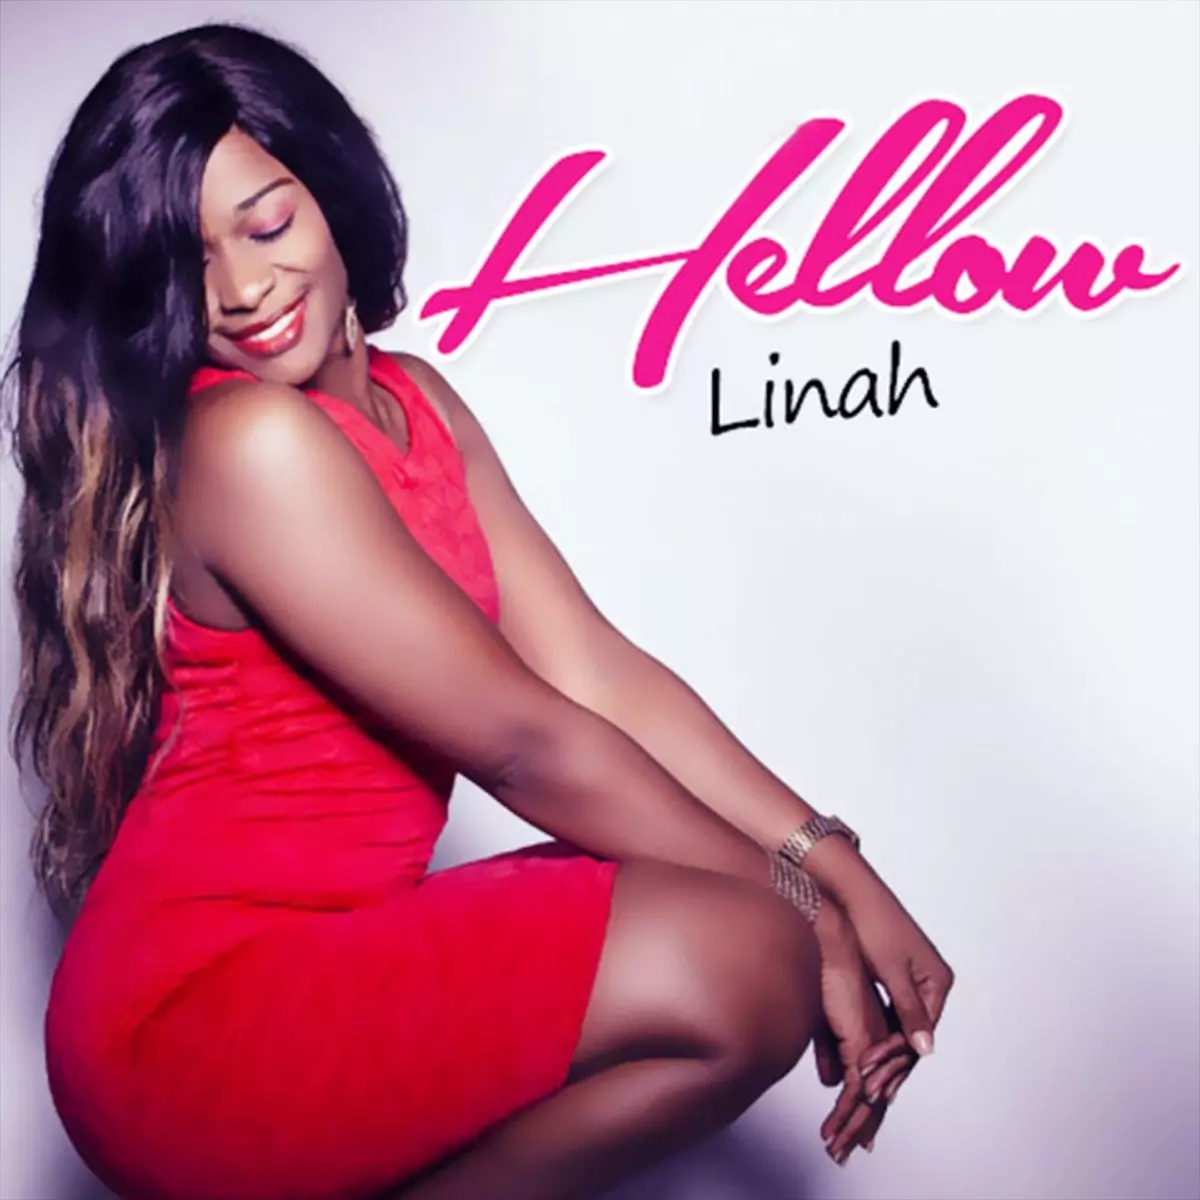 Hellow (feat. Christian Bella) - Single by Linah on Apple Music